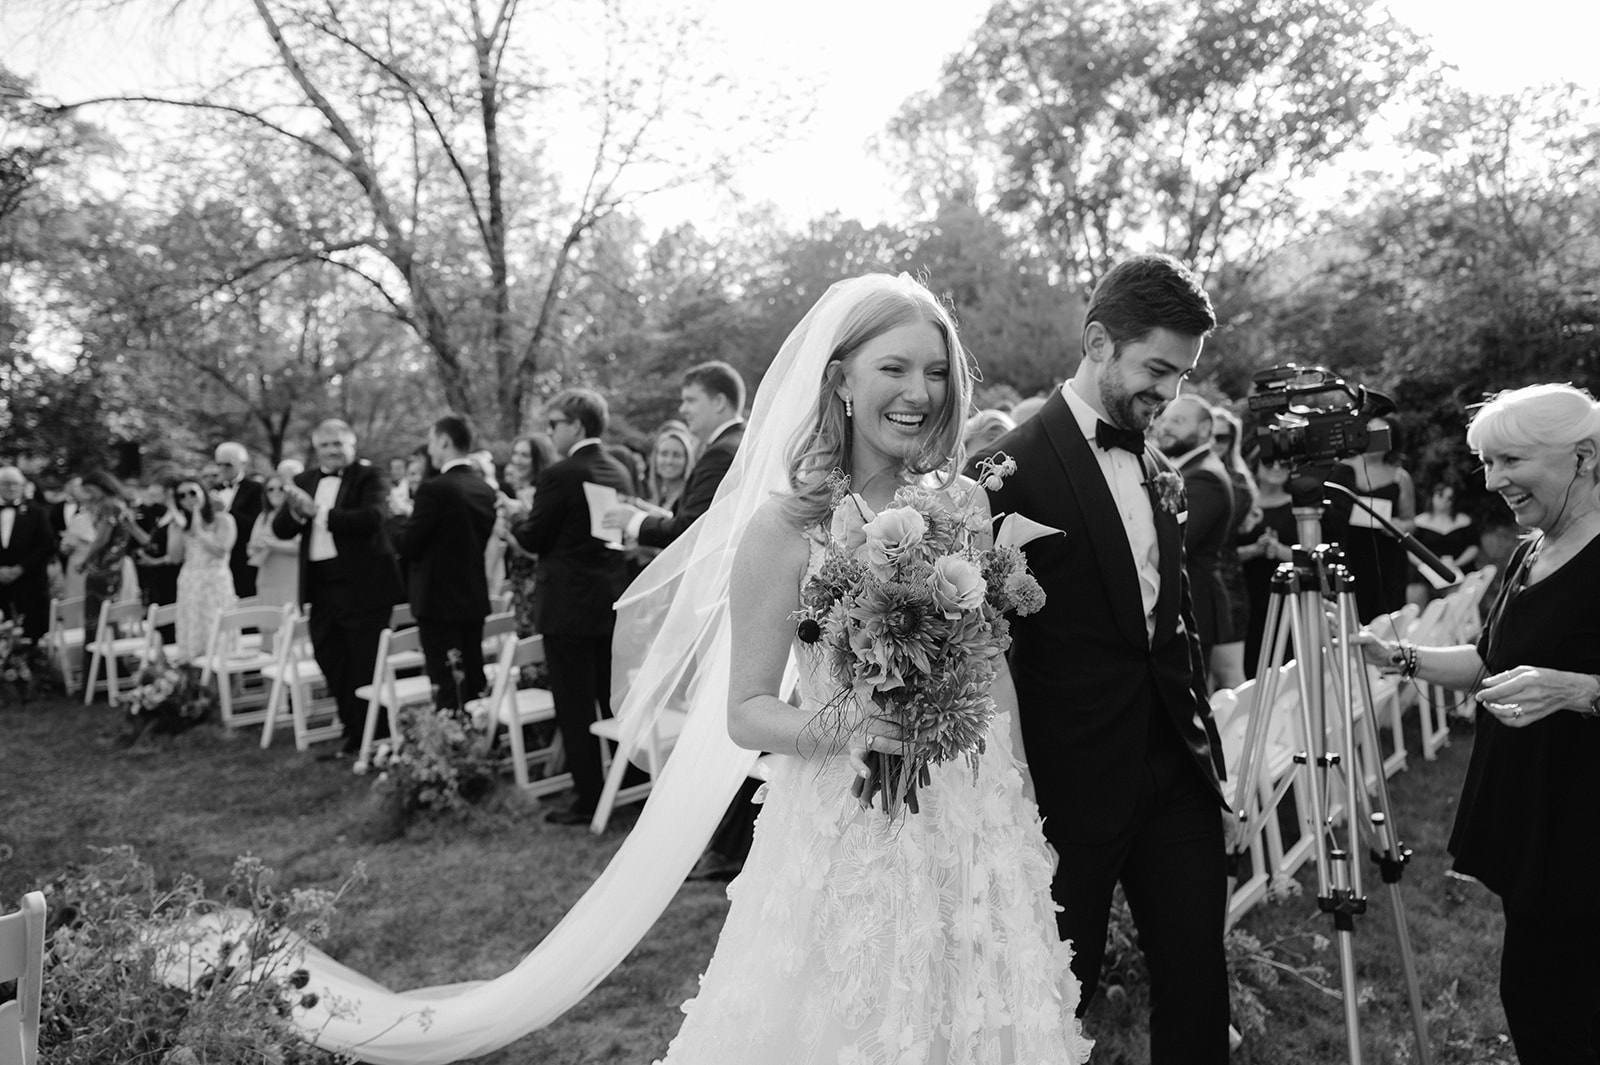 Bride and groom recessional.